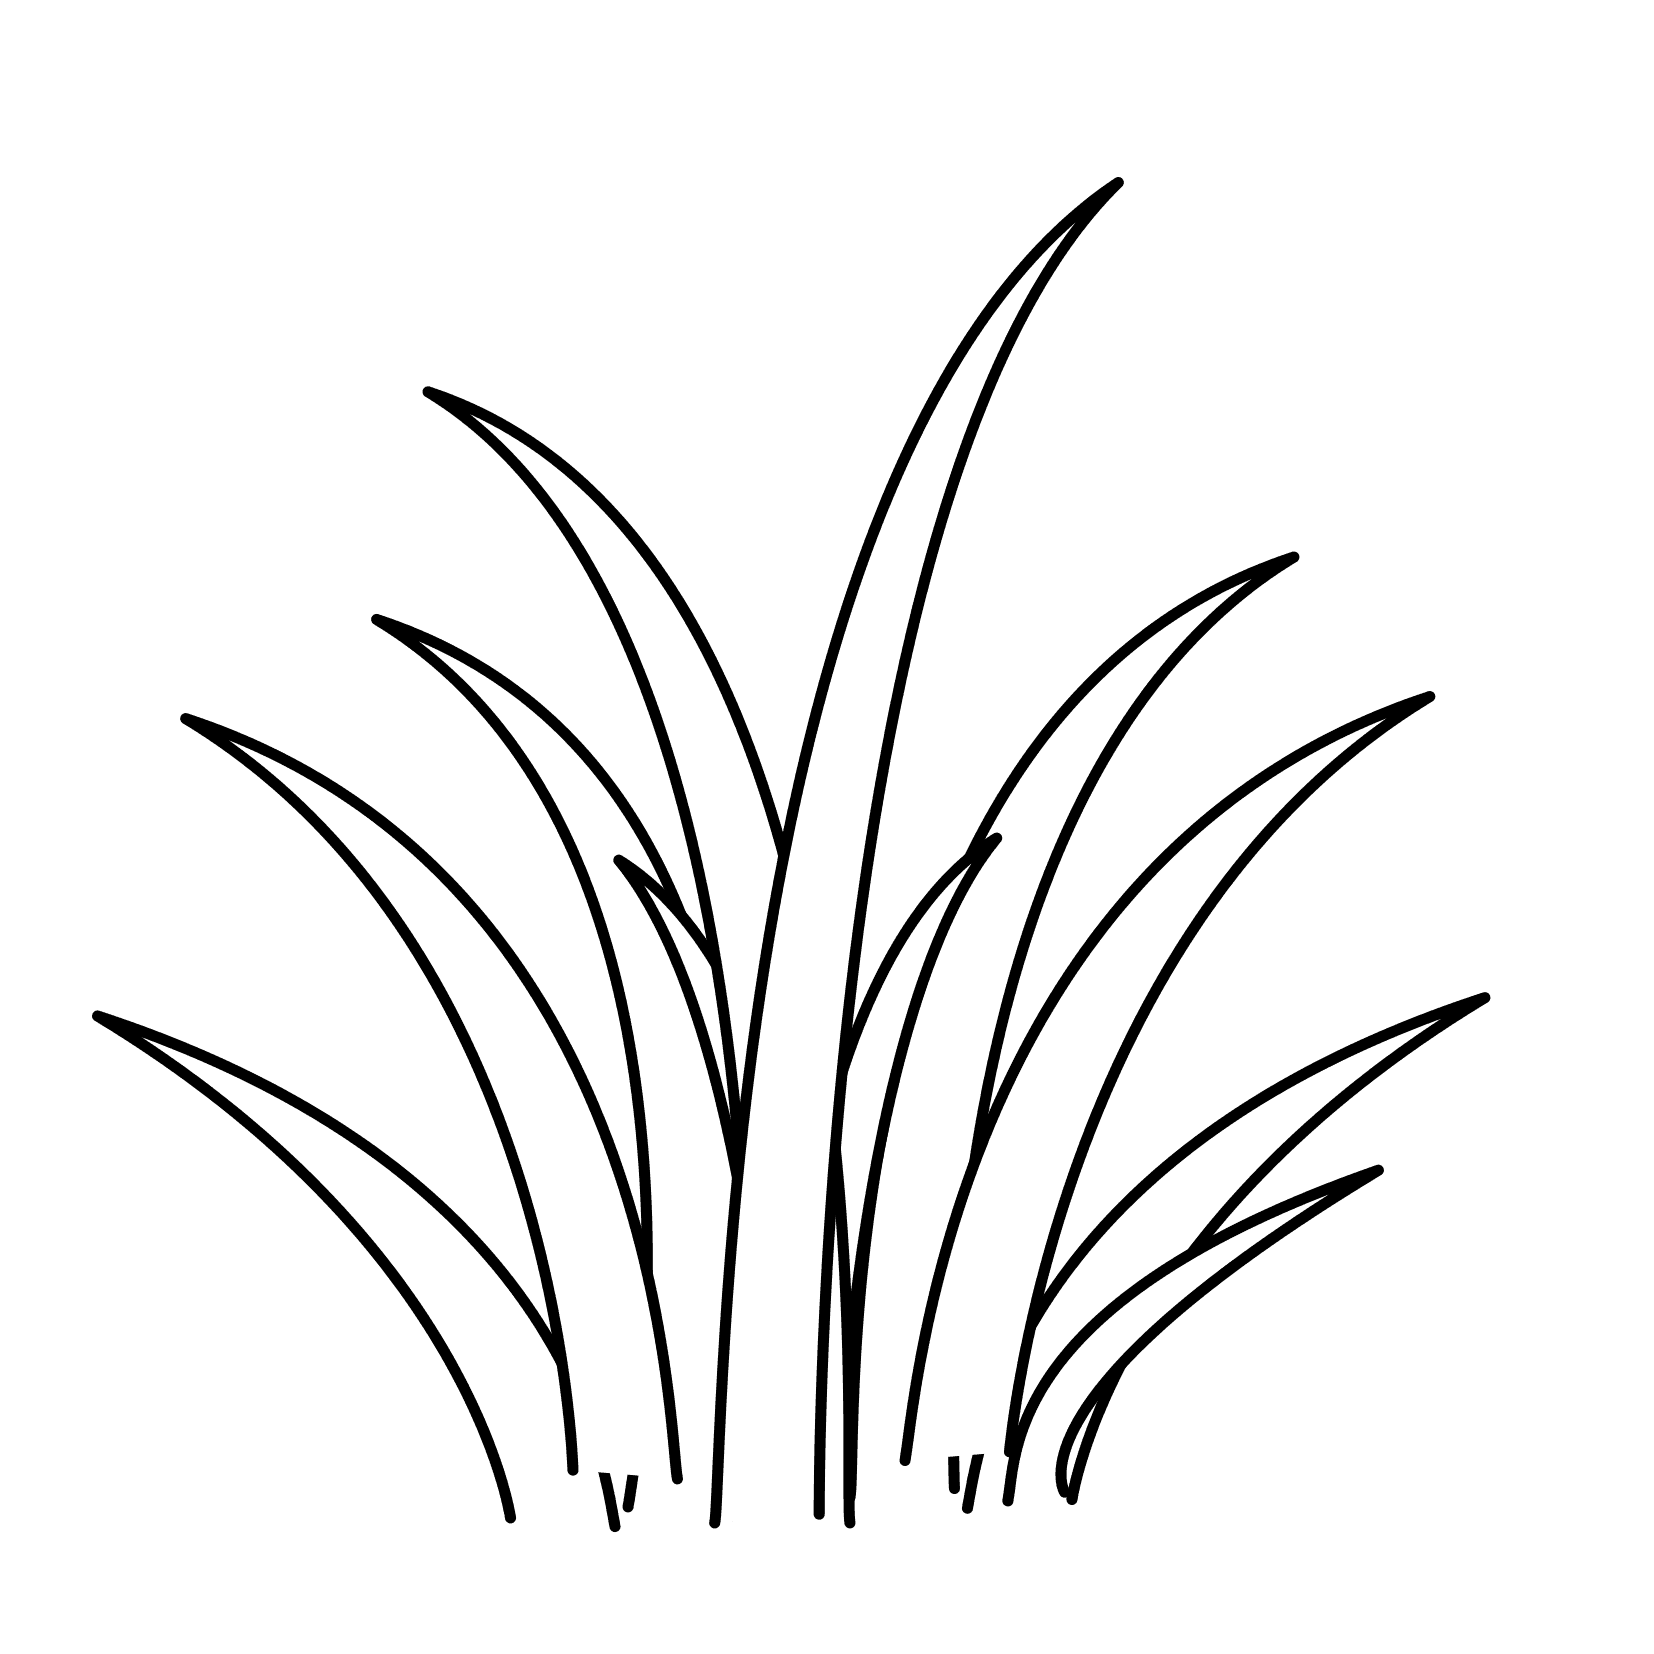 Grass Clipart Black And White 51 cliparts